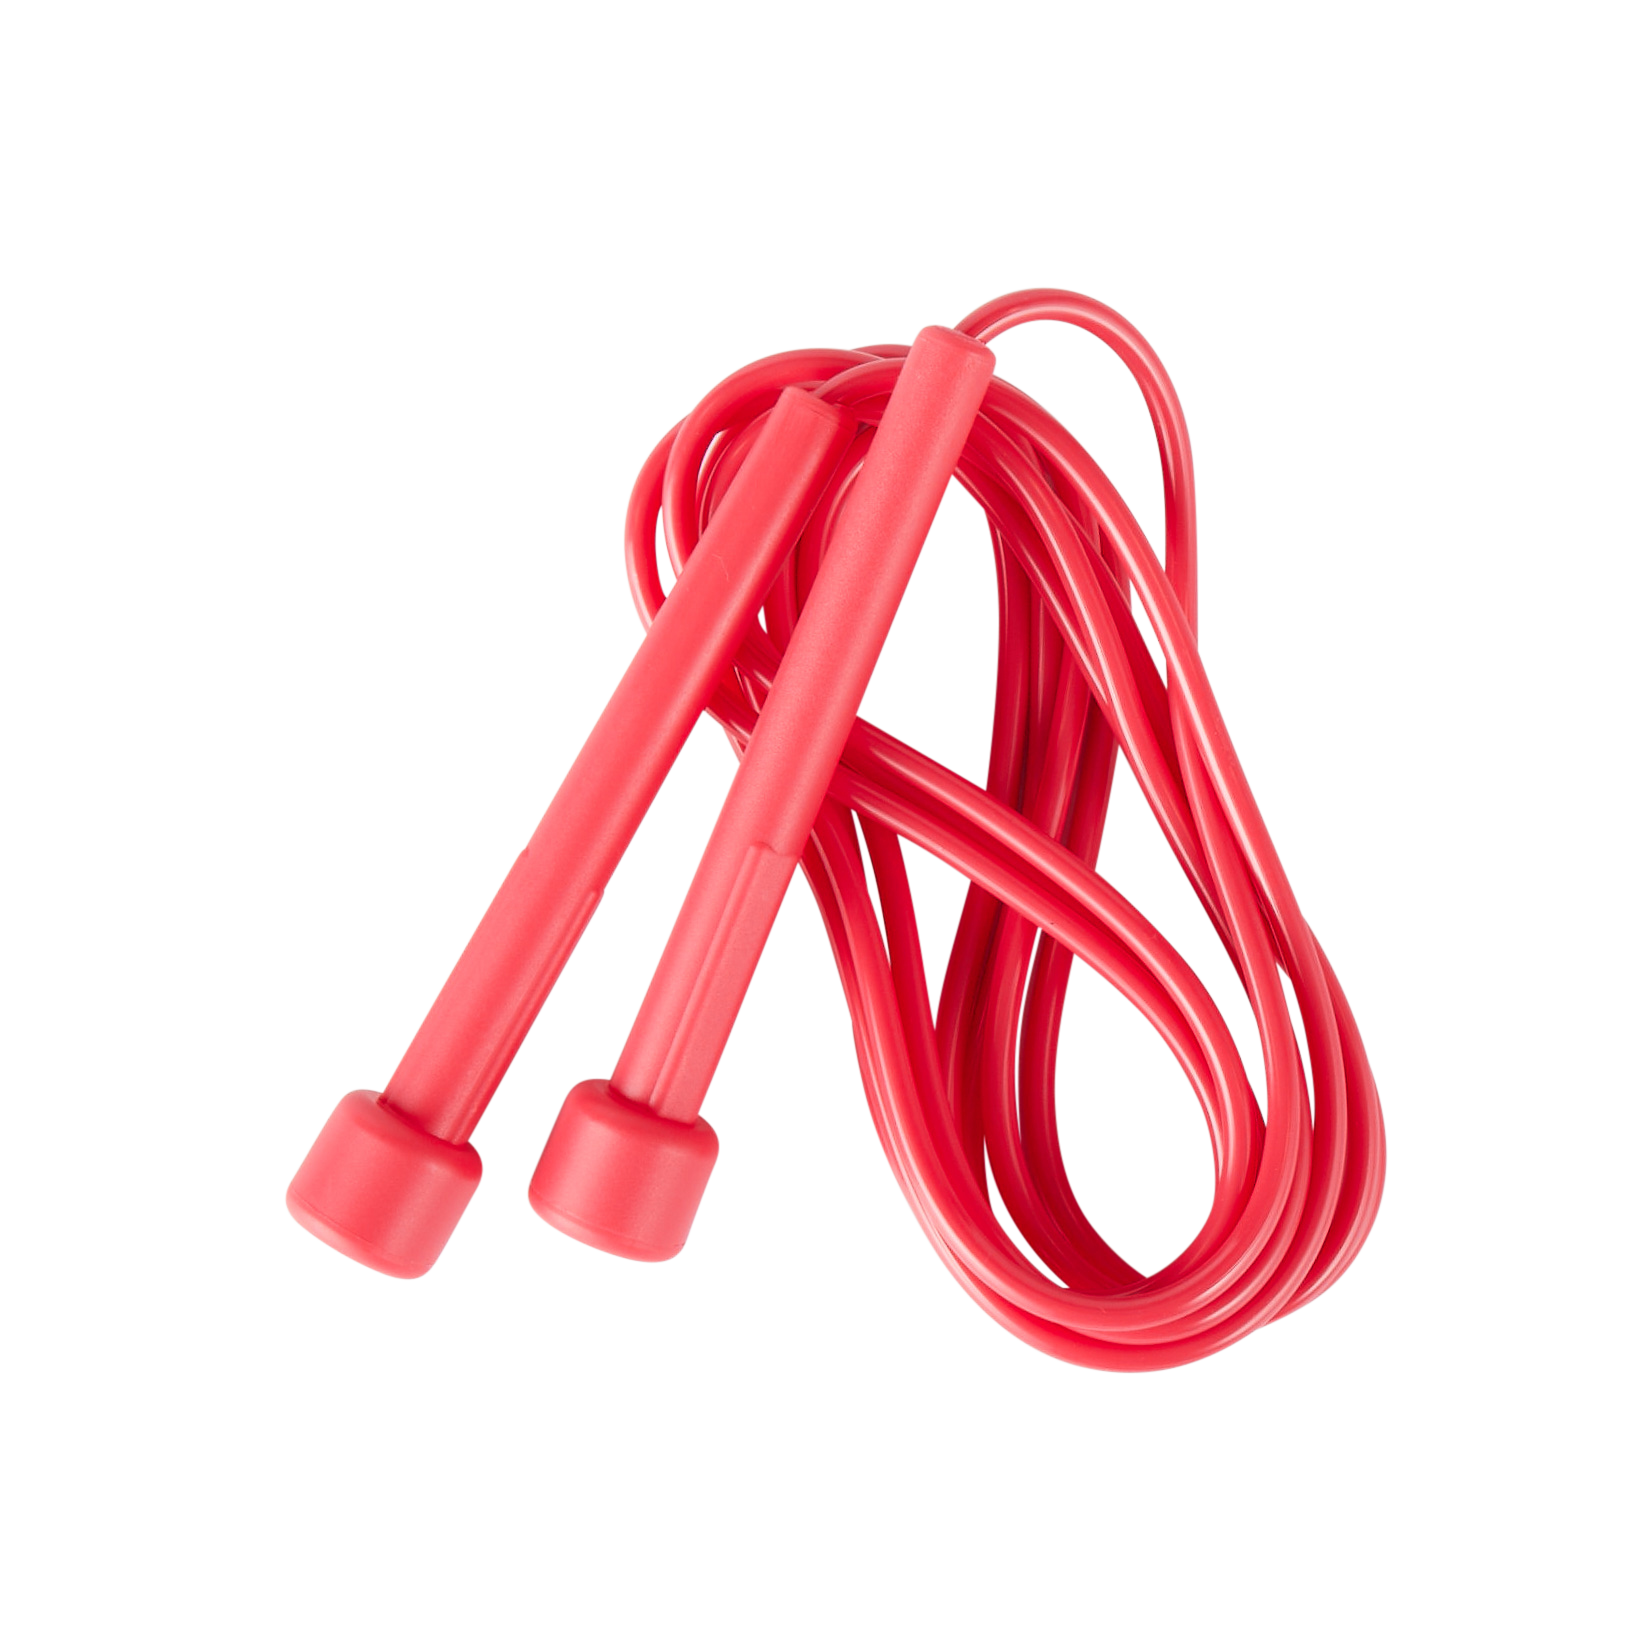 THE TWIDDLERS - Set of 5 Plastic Skipping Jump Ropes for Kids